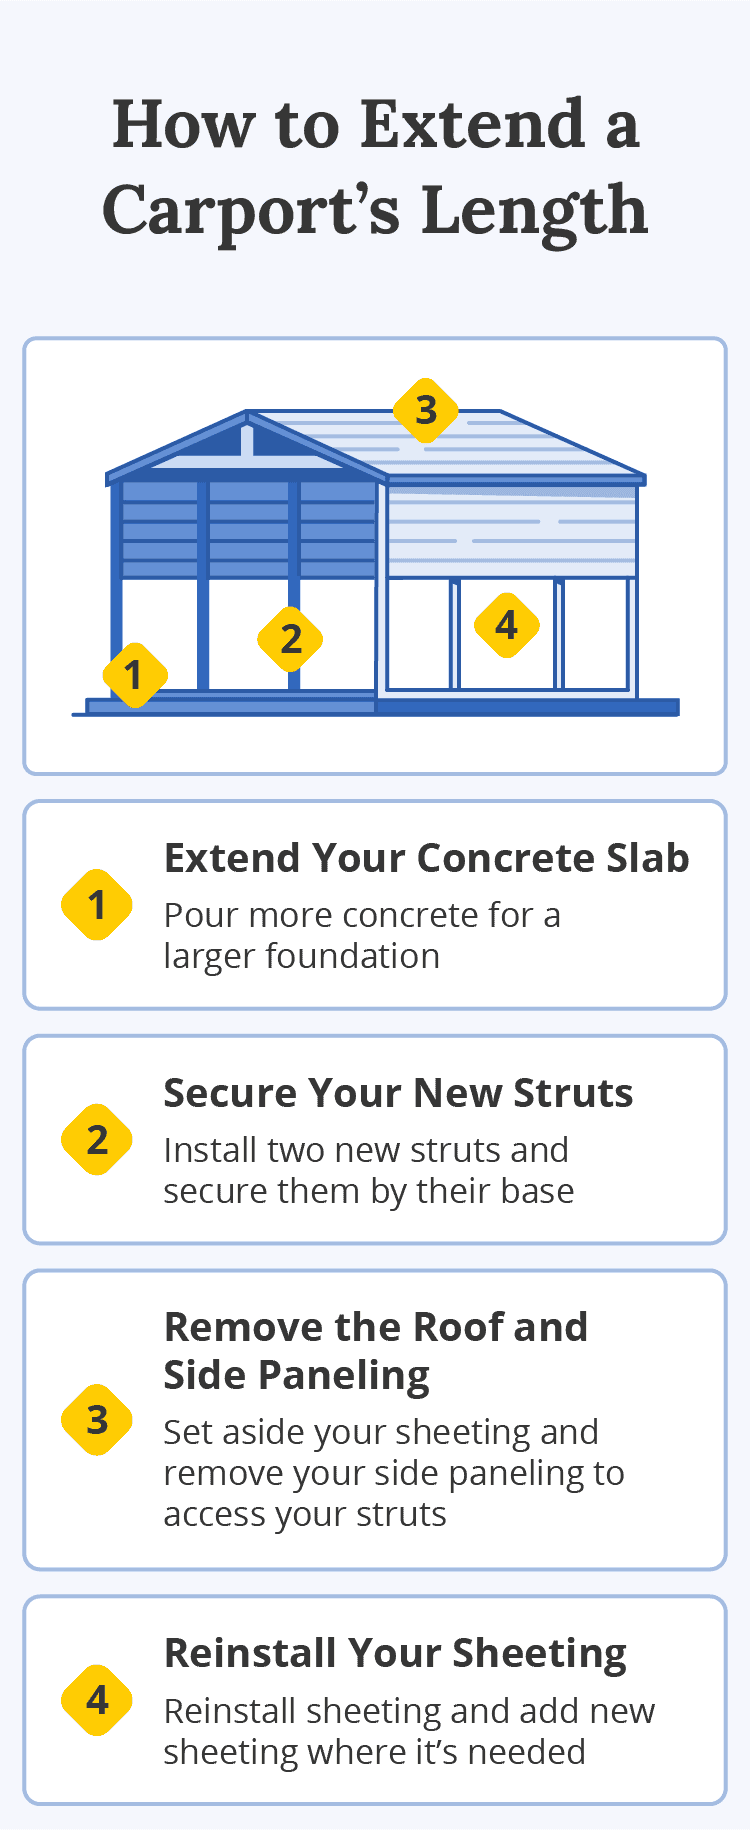 steps on how to extend a carport’s length